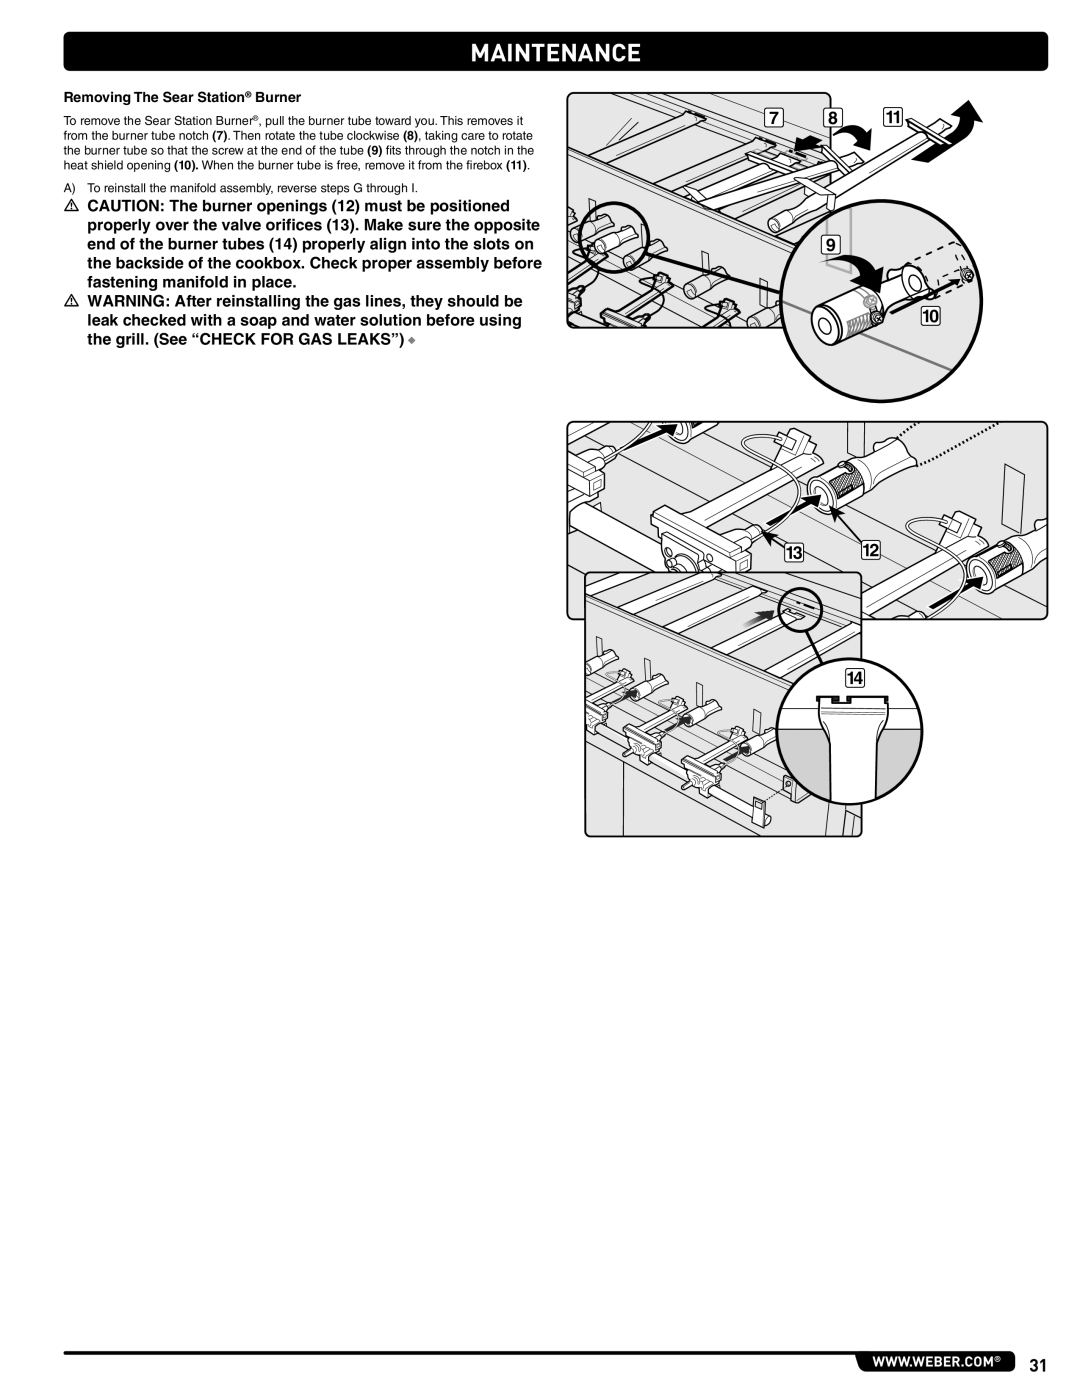 Weber 56576, Summit Gas Grill manual Maintenance, 71 82, 132 143, m CAUTION The burner openings 12 must be positioned 